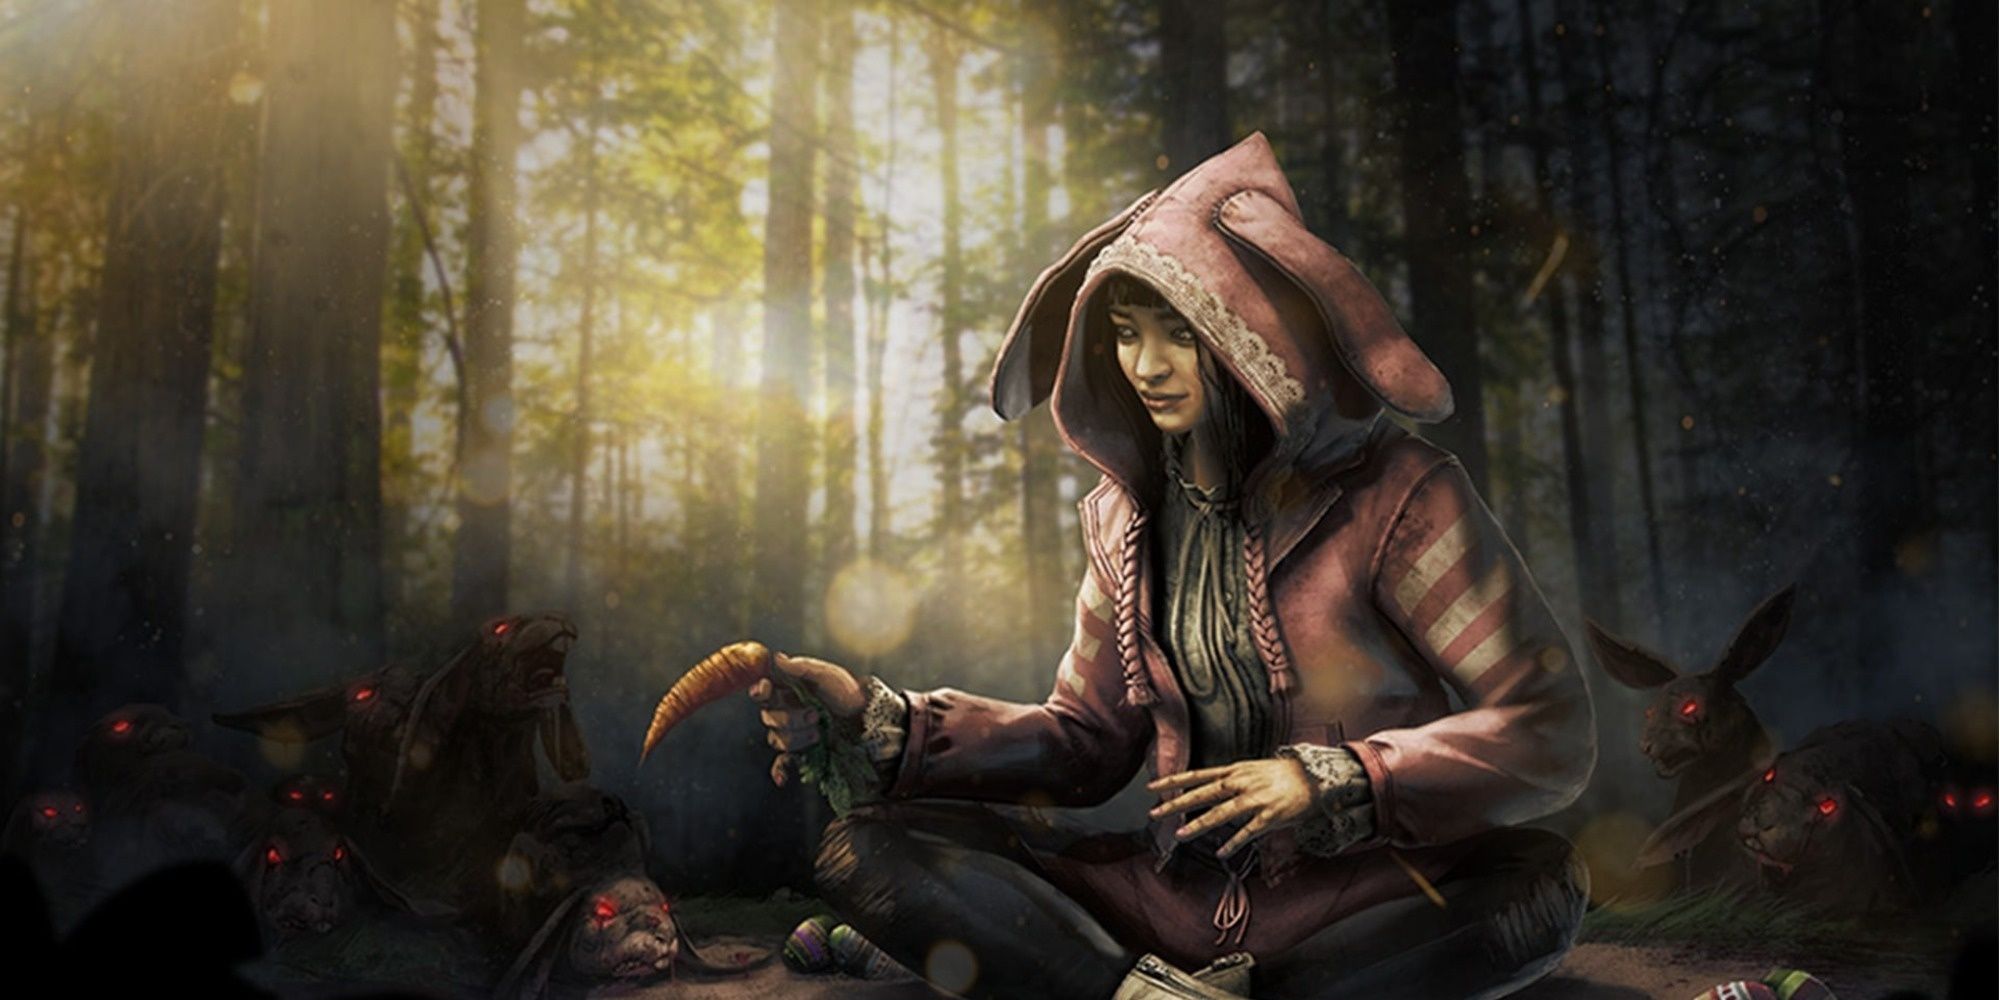 Feng Min playing with some creepy rabbits in Dead By Daylight